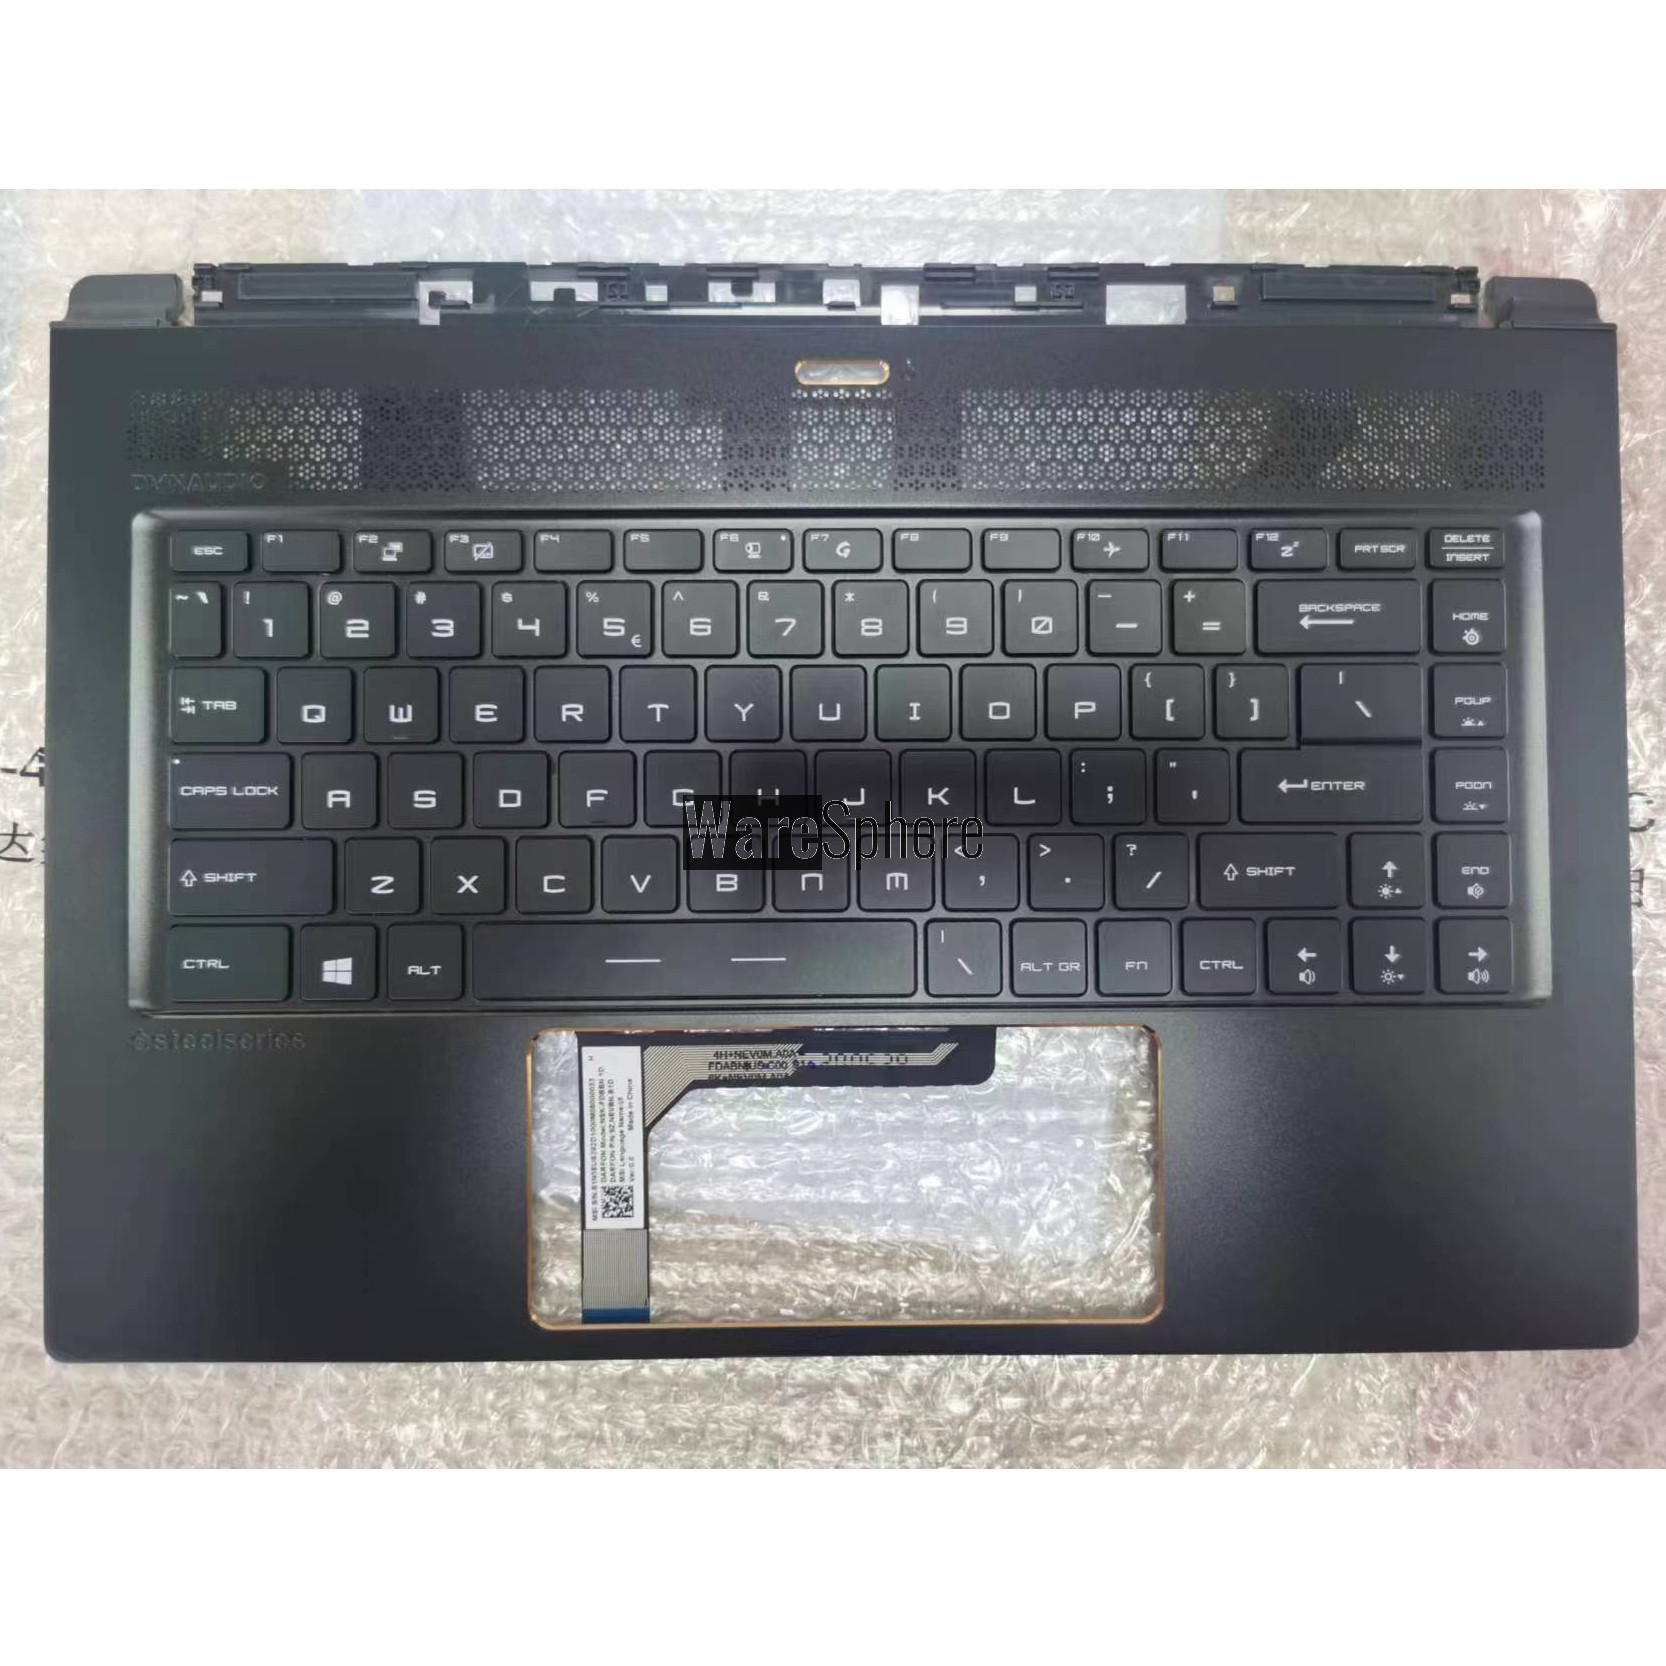 Top Cover Upper Case for MSI GS65 MS-16Q4 Palmrest With RGB backlight Keyboard 307-6Q4C225-TF1